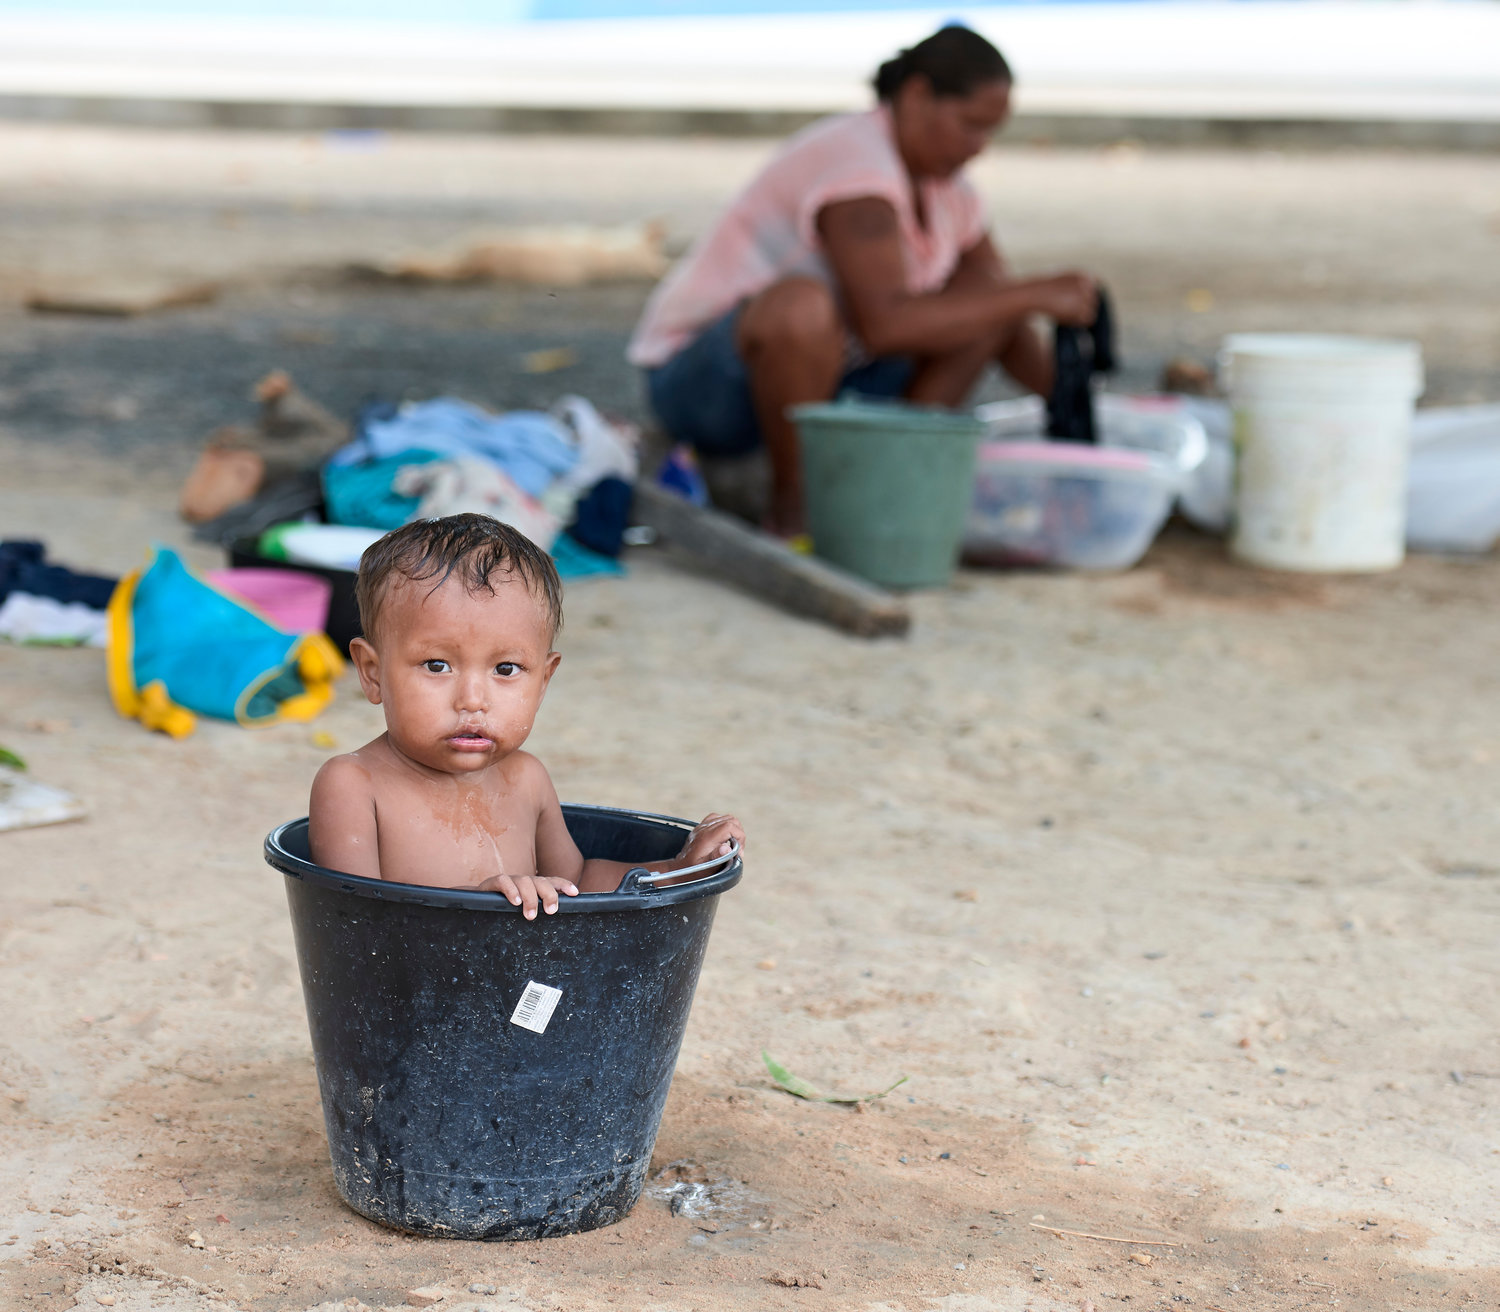 Jesus Miguel Moraleda, a 1-year-old Warao indigenous boy from Venezuela, bathes in a bucket as his mother does laundry behind him April 2, 2019, in Boa Vista, Brazil. The Vatican released Pope Francis' postsynodal apostolic exhortation, "Querida Amazonia" (Beloved Amazonia), Feb. 12, 2020.